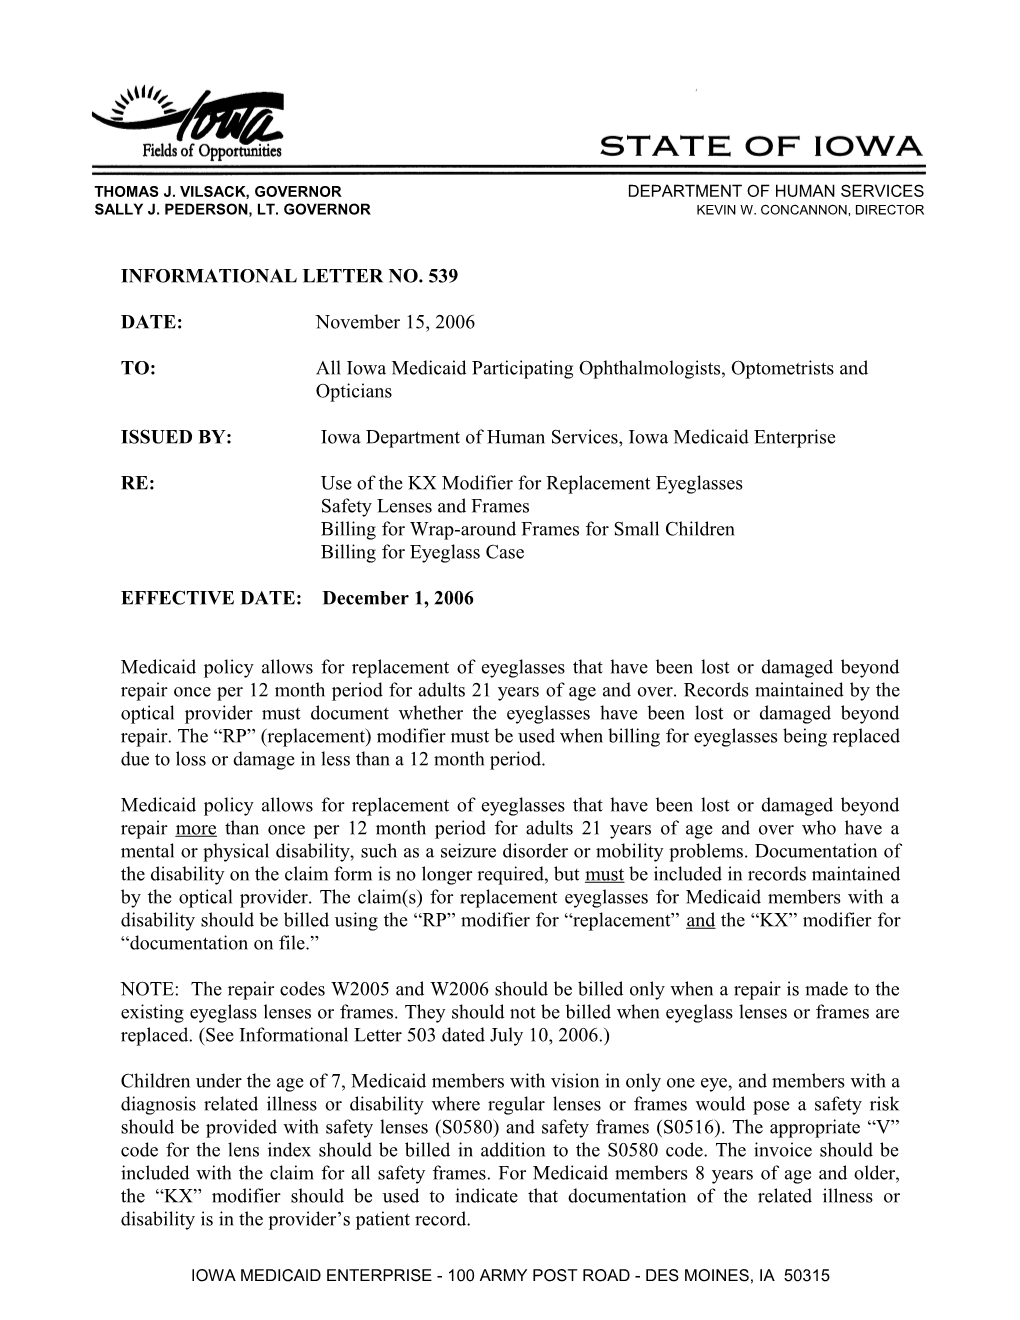 Department of Human Services Letterhead s1